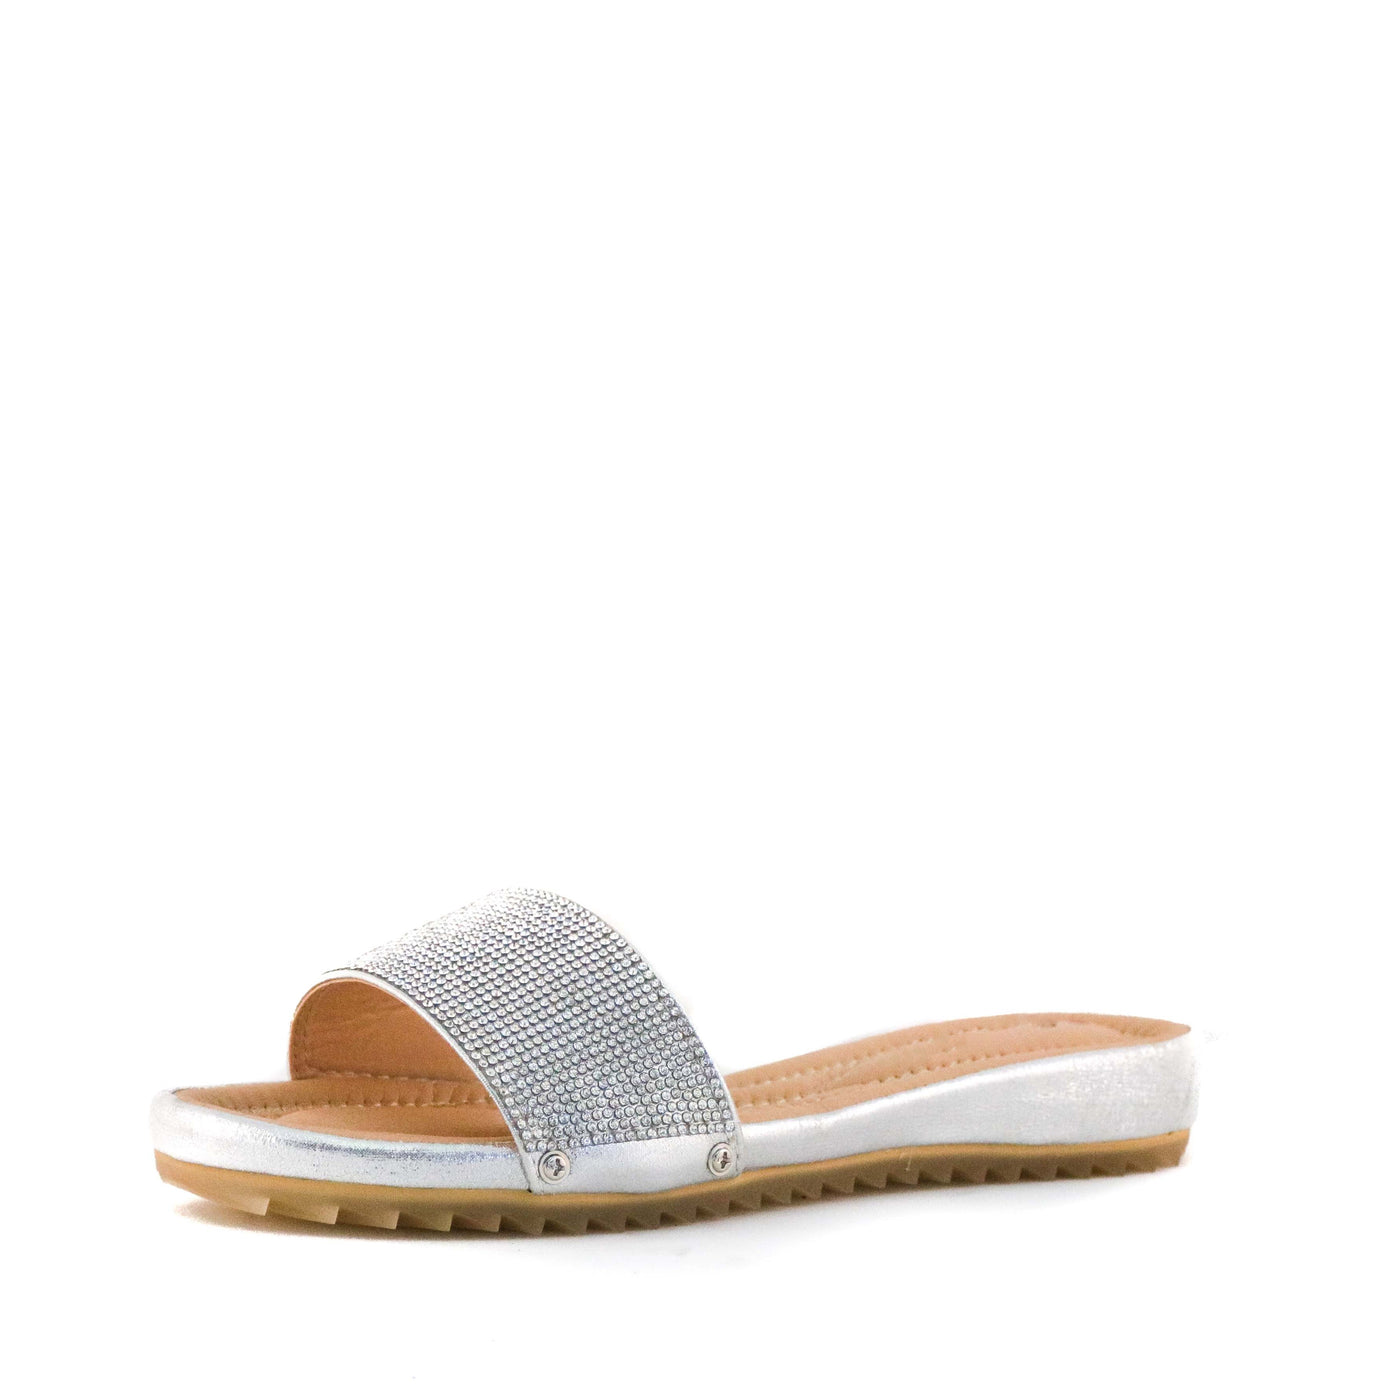 Women's Cyprus Crystal Slide Sandal by Nest Shoes